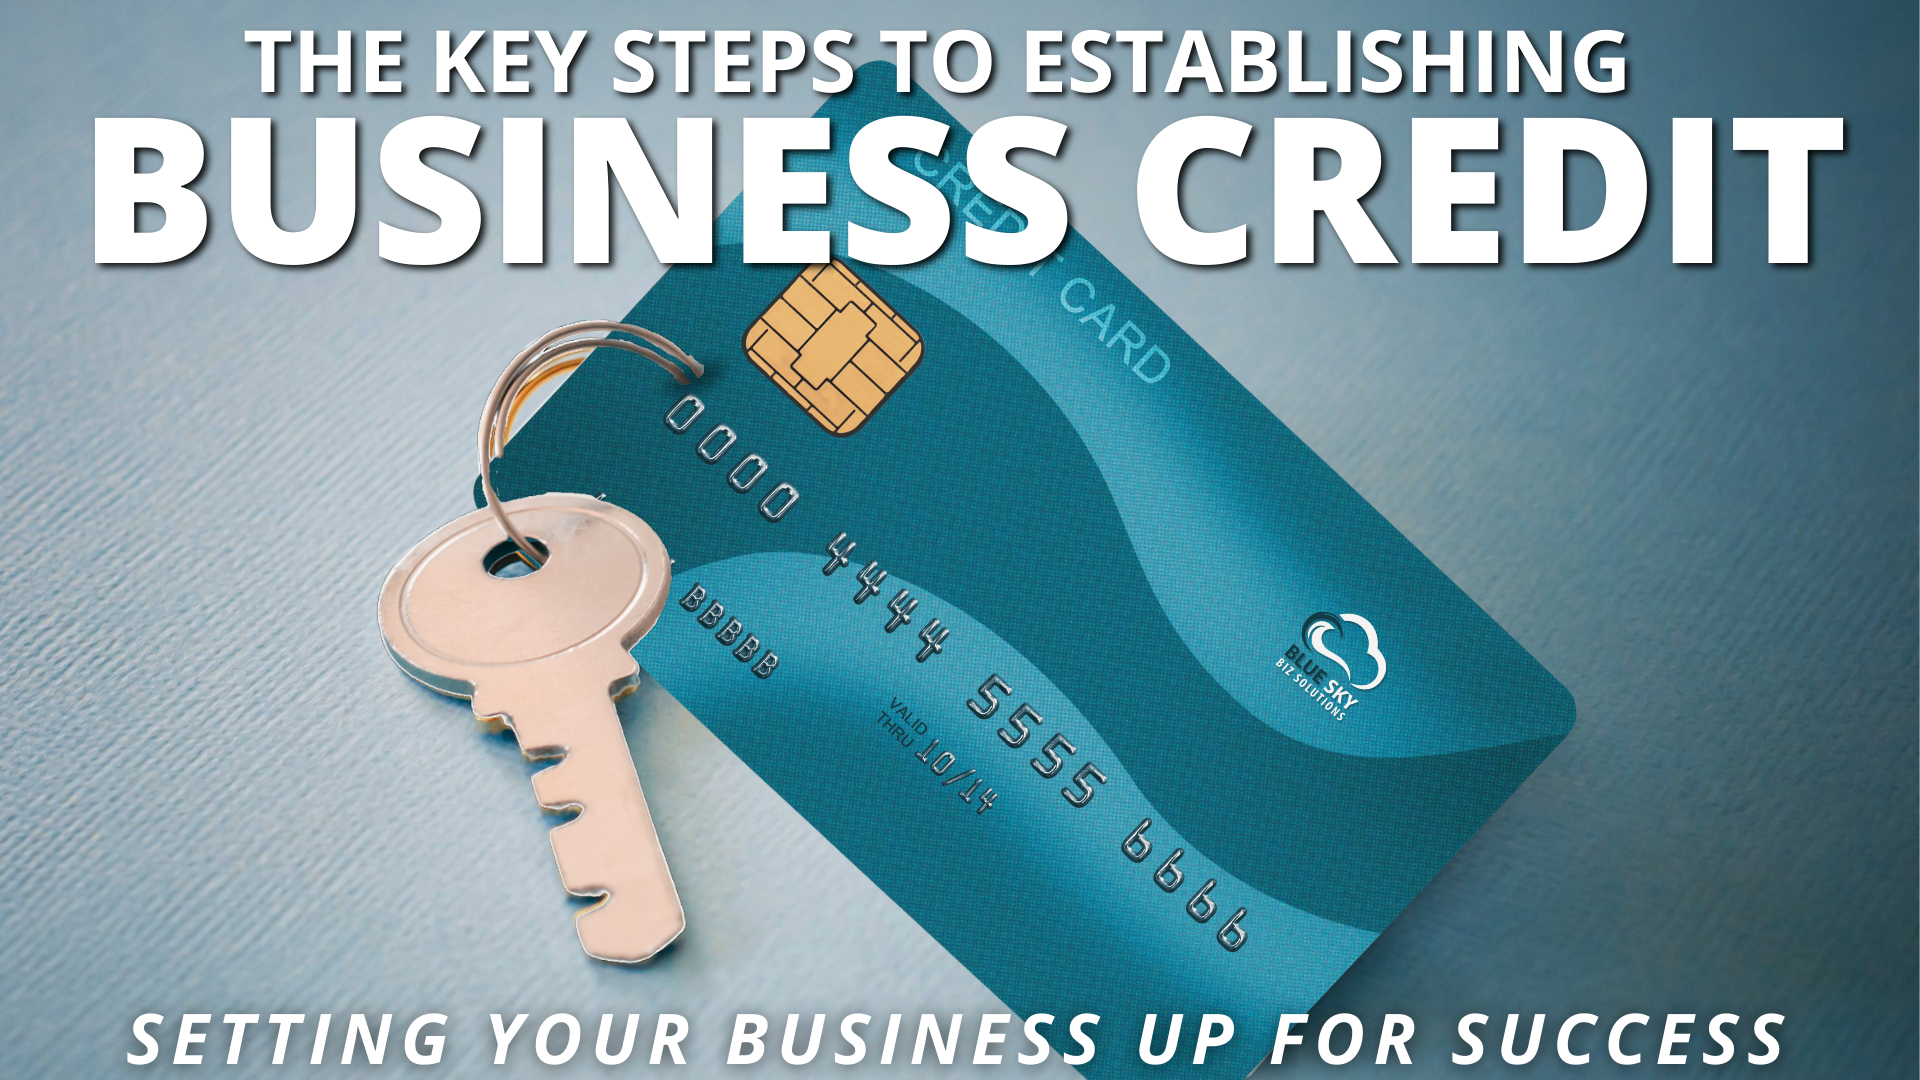 The Key Steps to Establishing Business Credit: Setting Your Business Up for Success